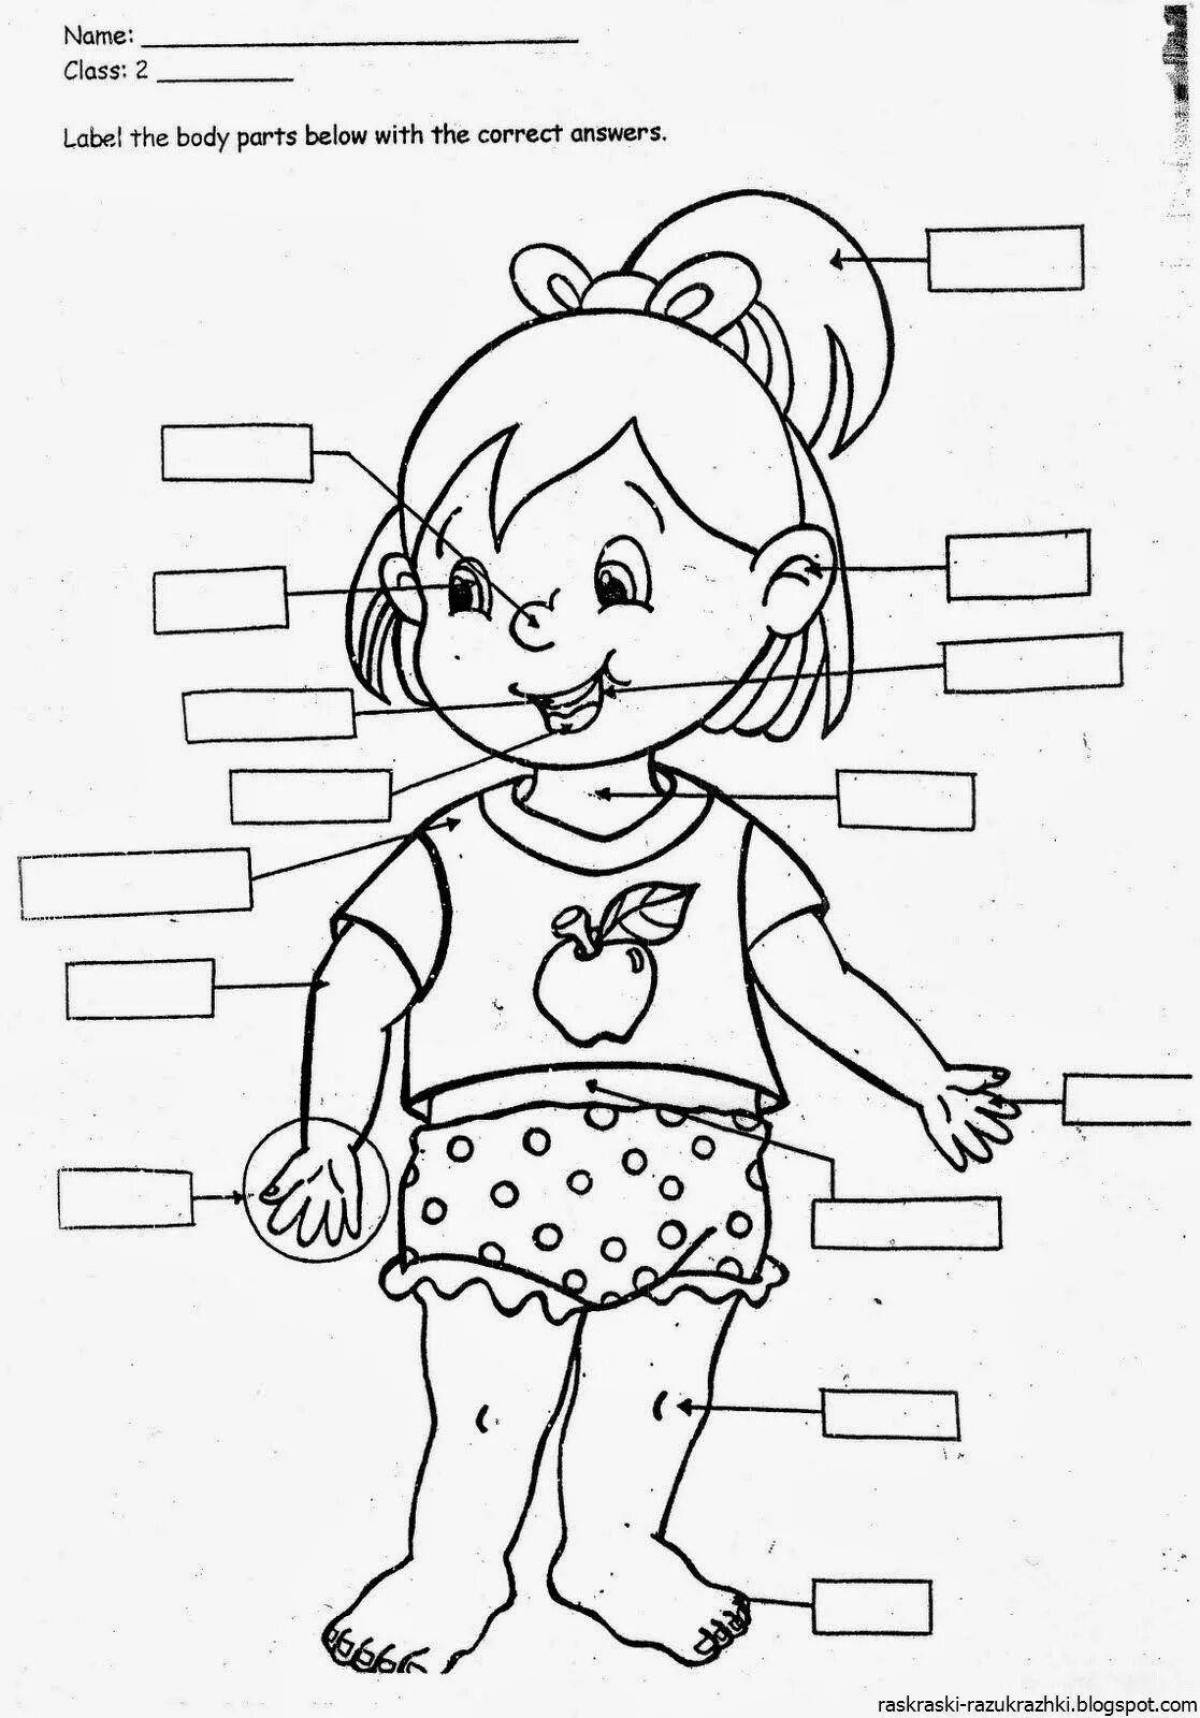 Adorable people coloring pages for preschoolers